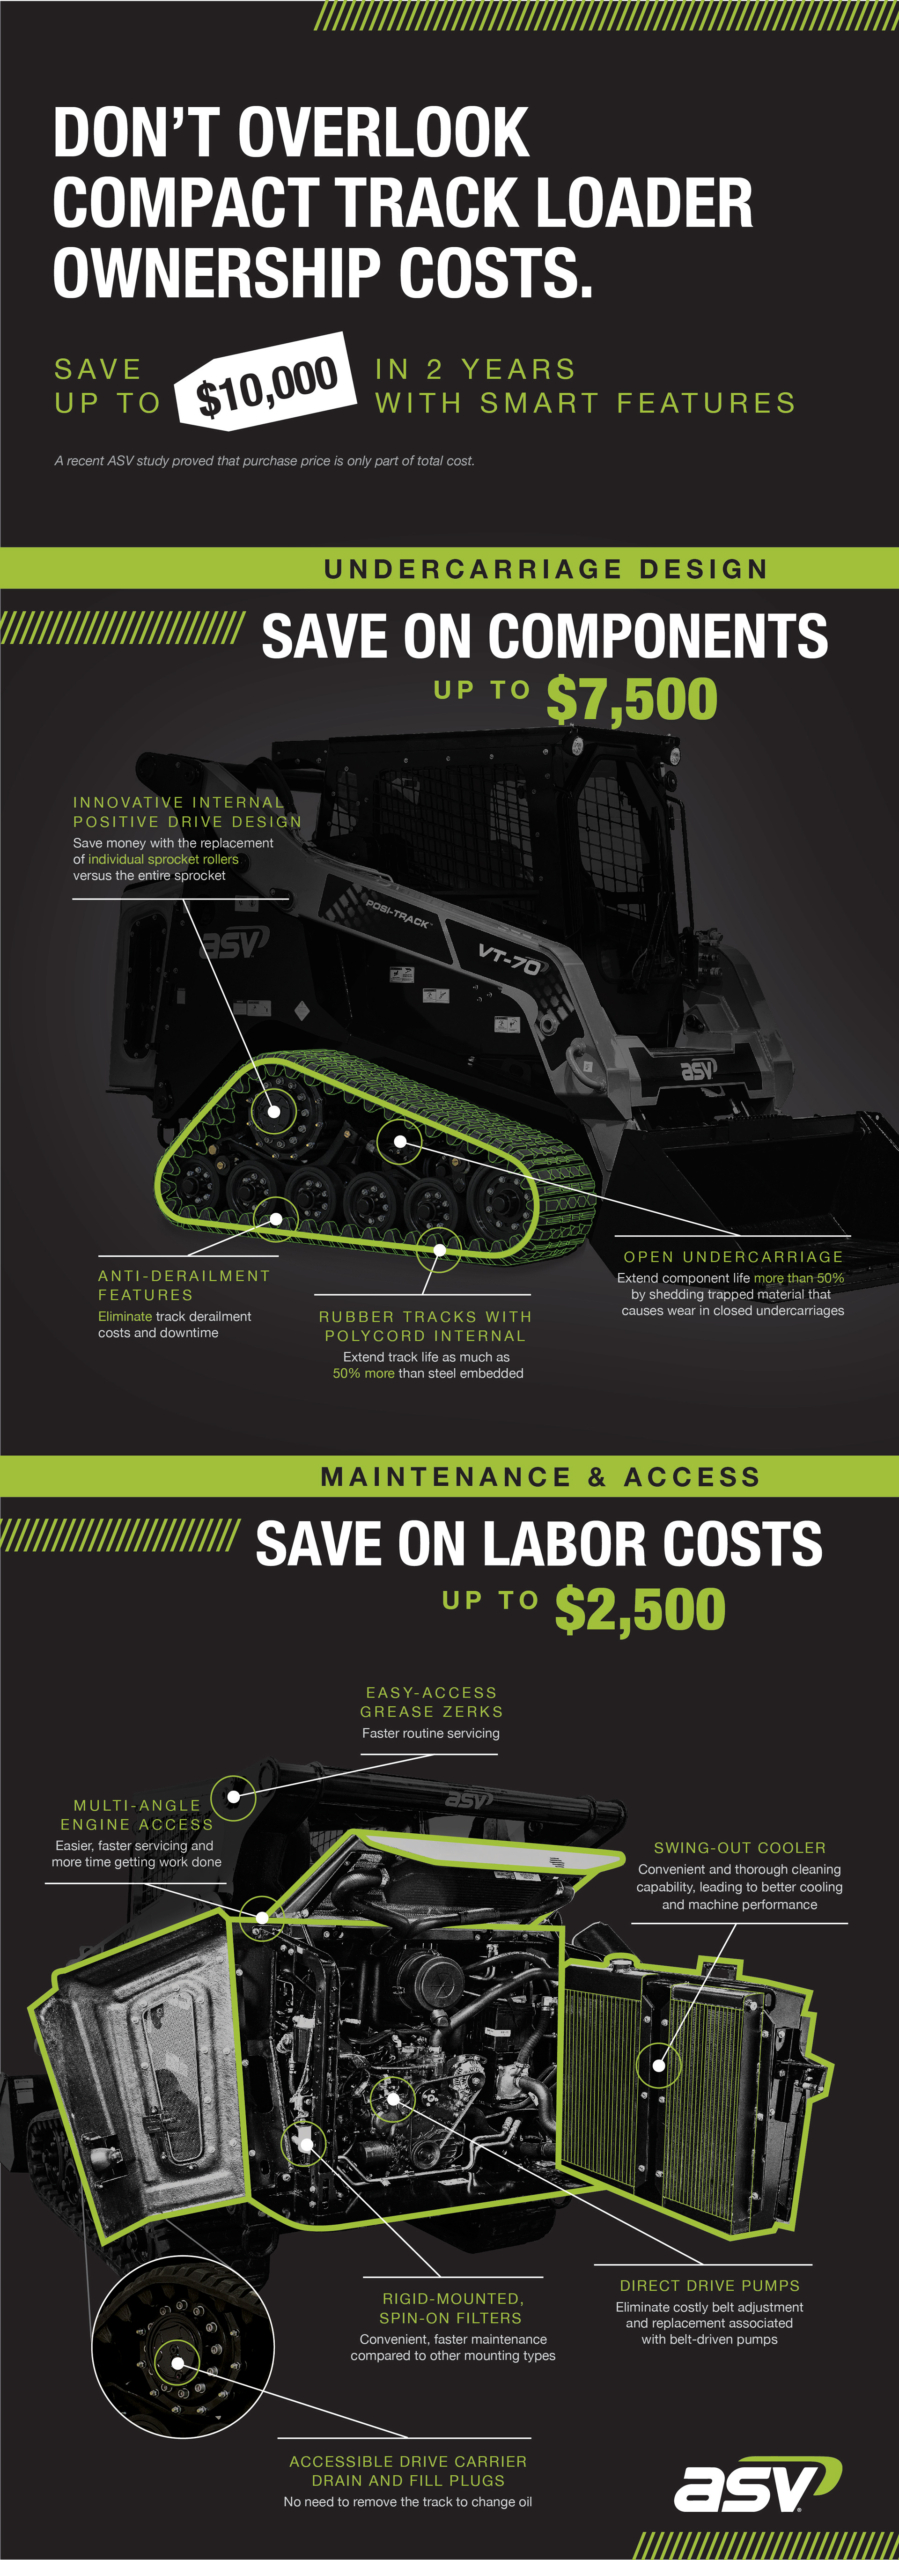 Choosing an ASV Posi-Track Loader® Could Save You Up to $10,000